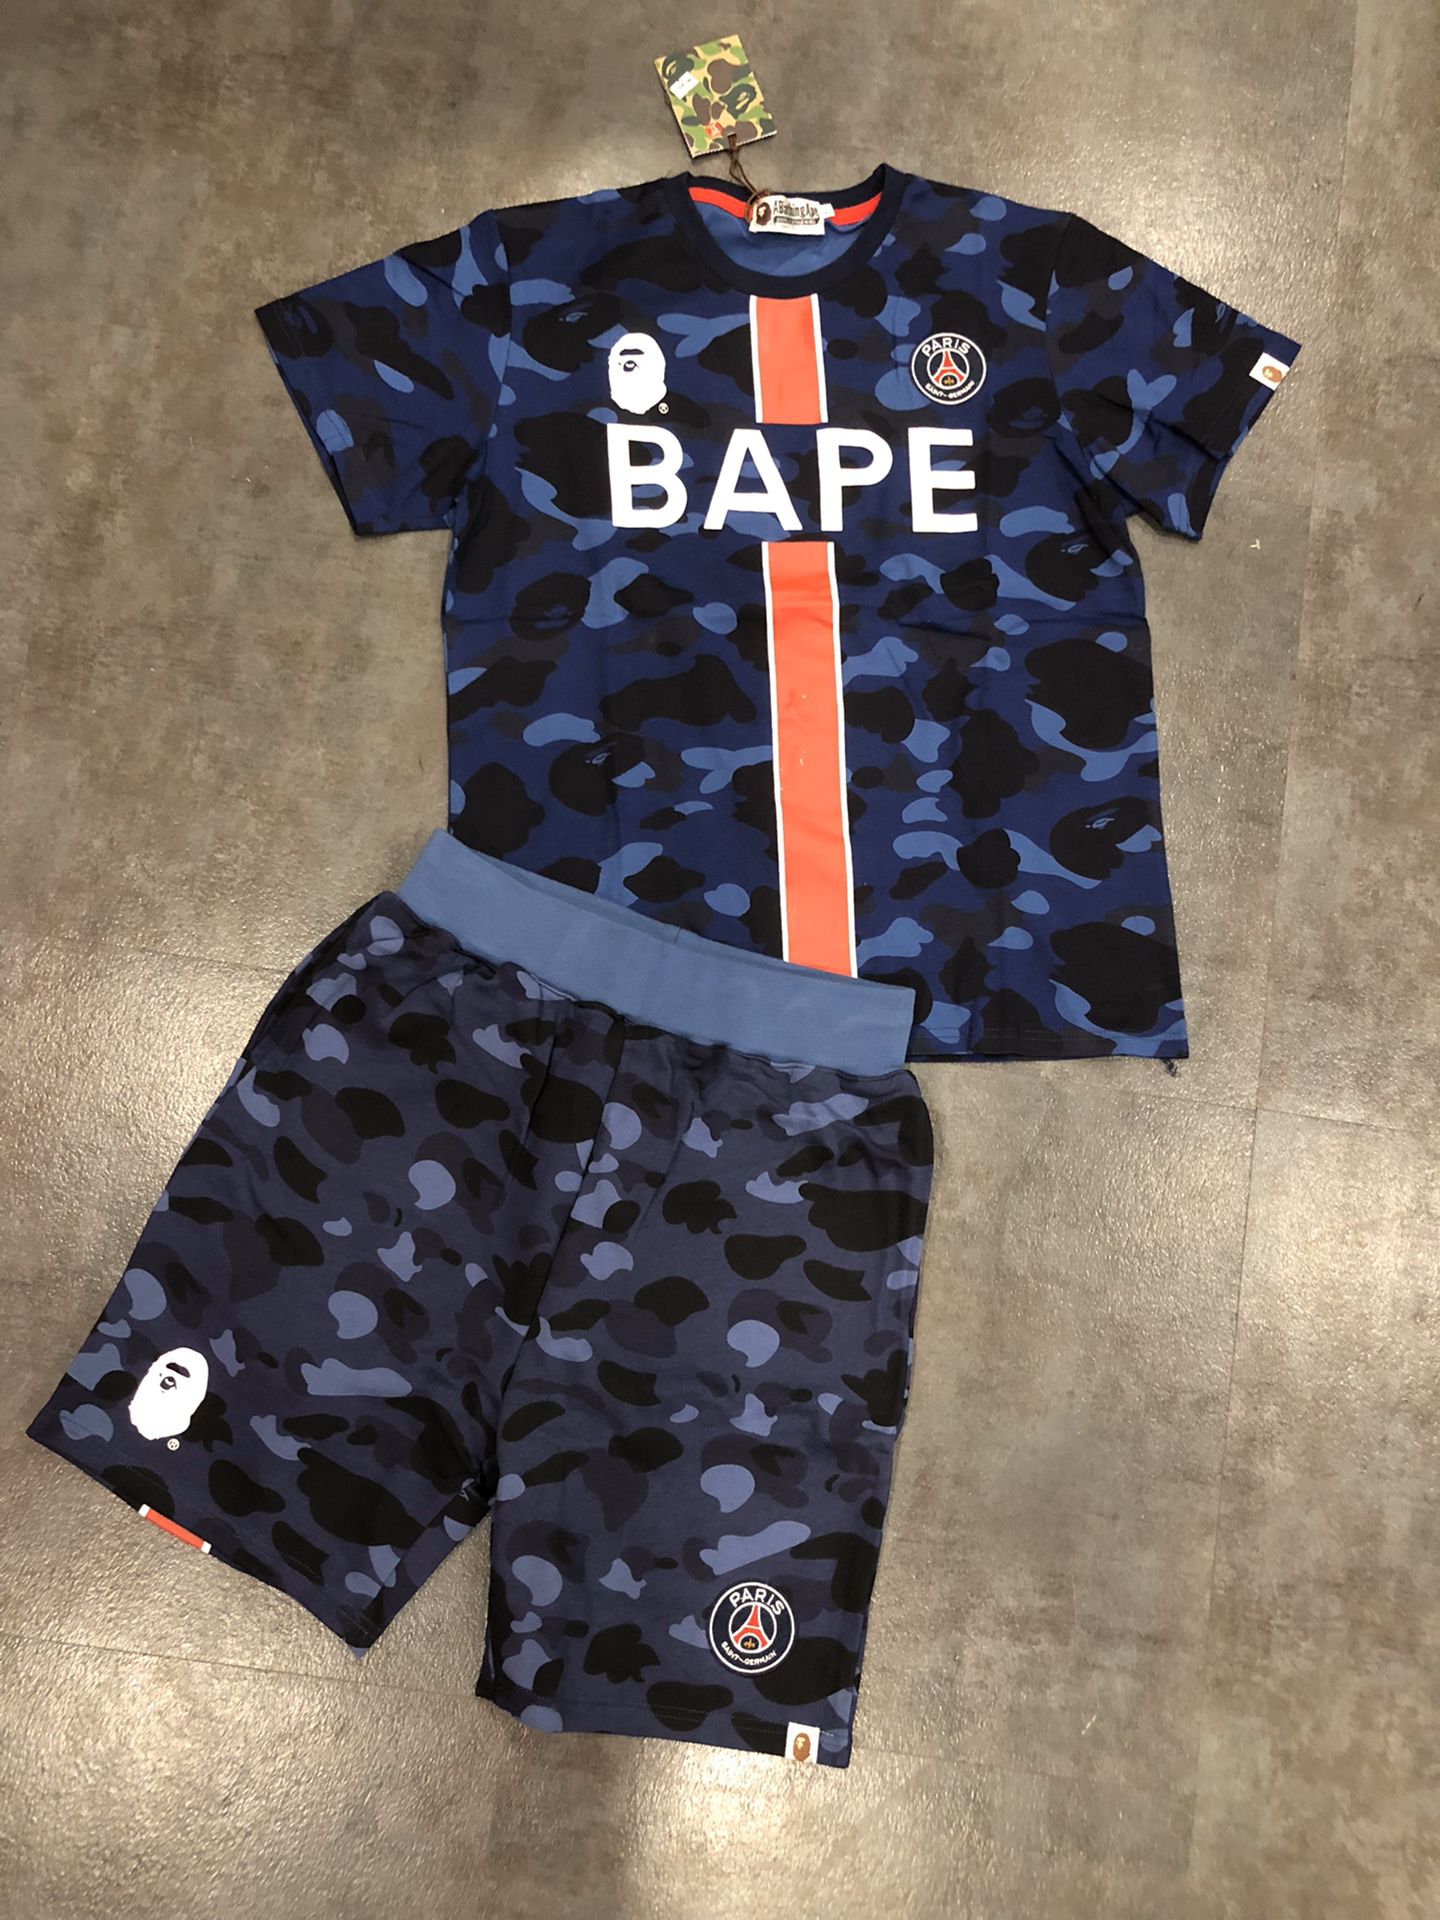 Bape Paris t shirt and shorts set size L can sell separate